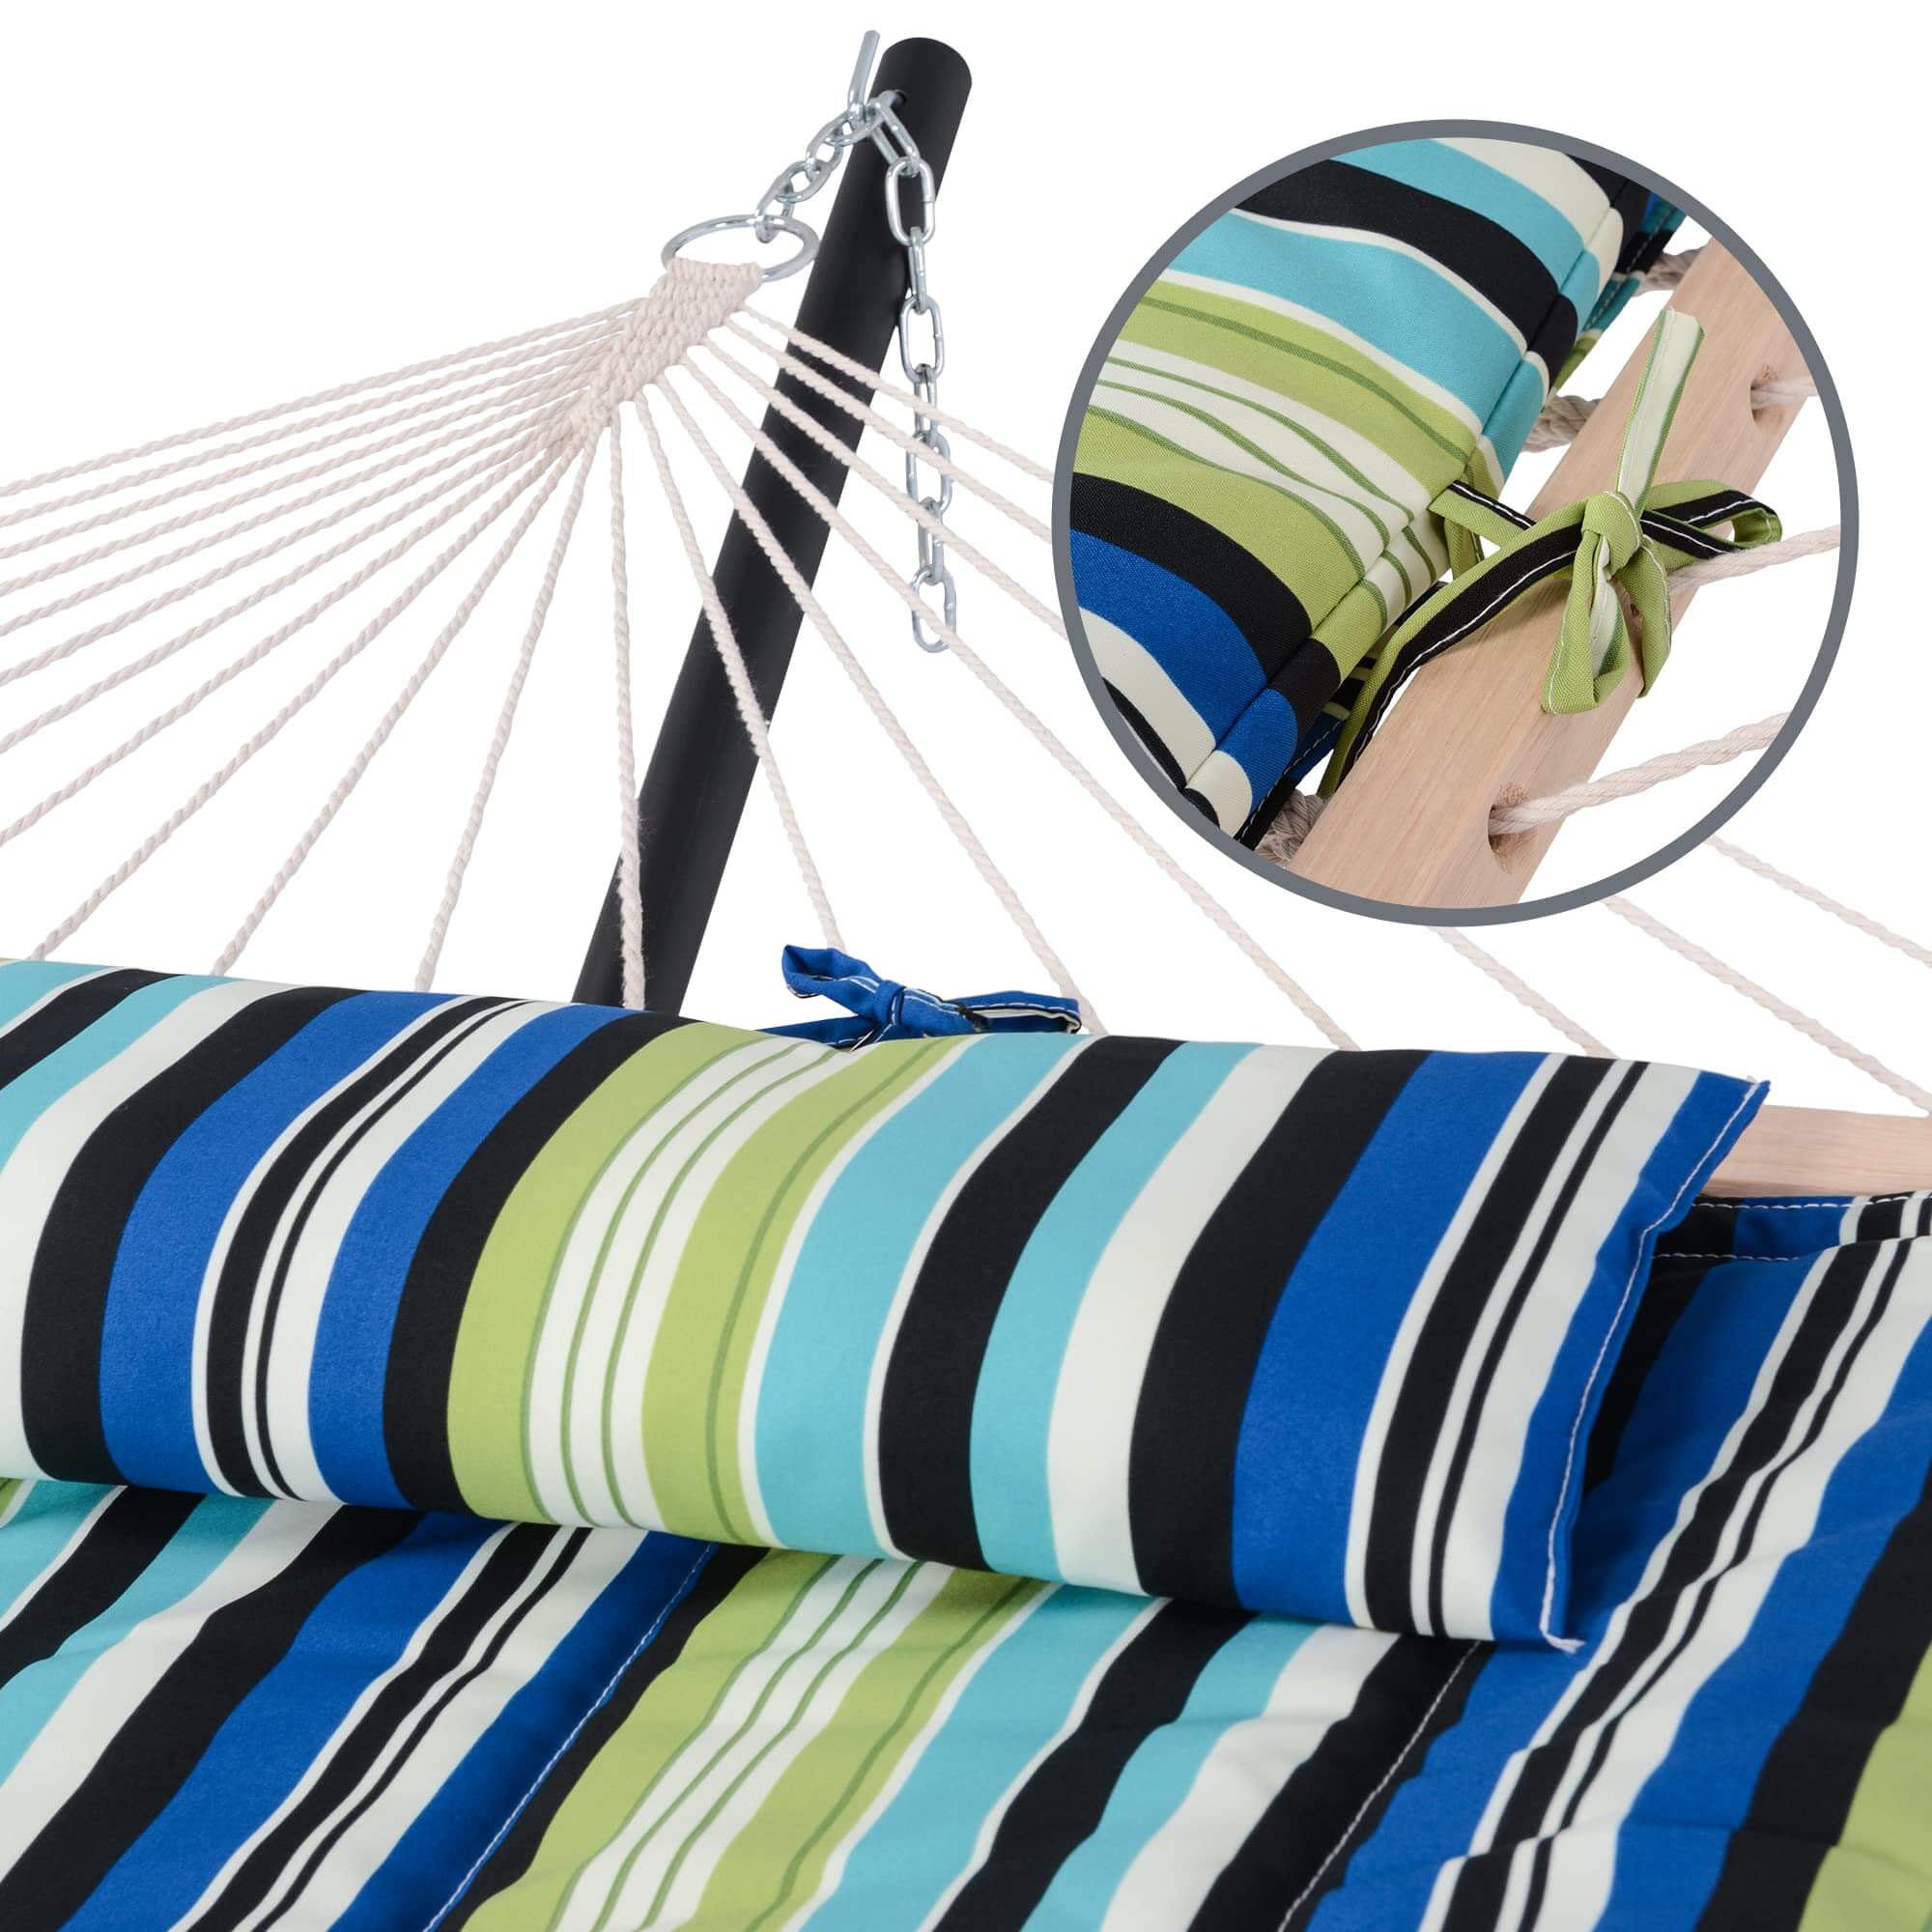 SUNCREAT-2-Layer-Cotton-Rope-Hammock-Blue-Green#color_blue-green